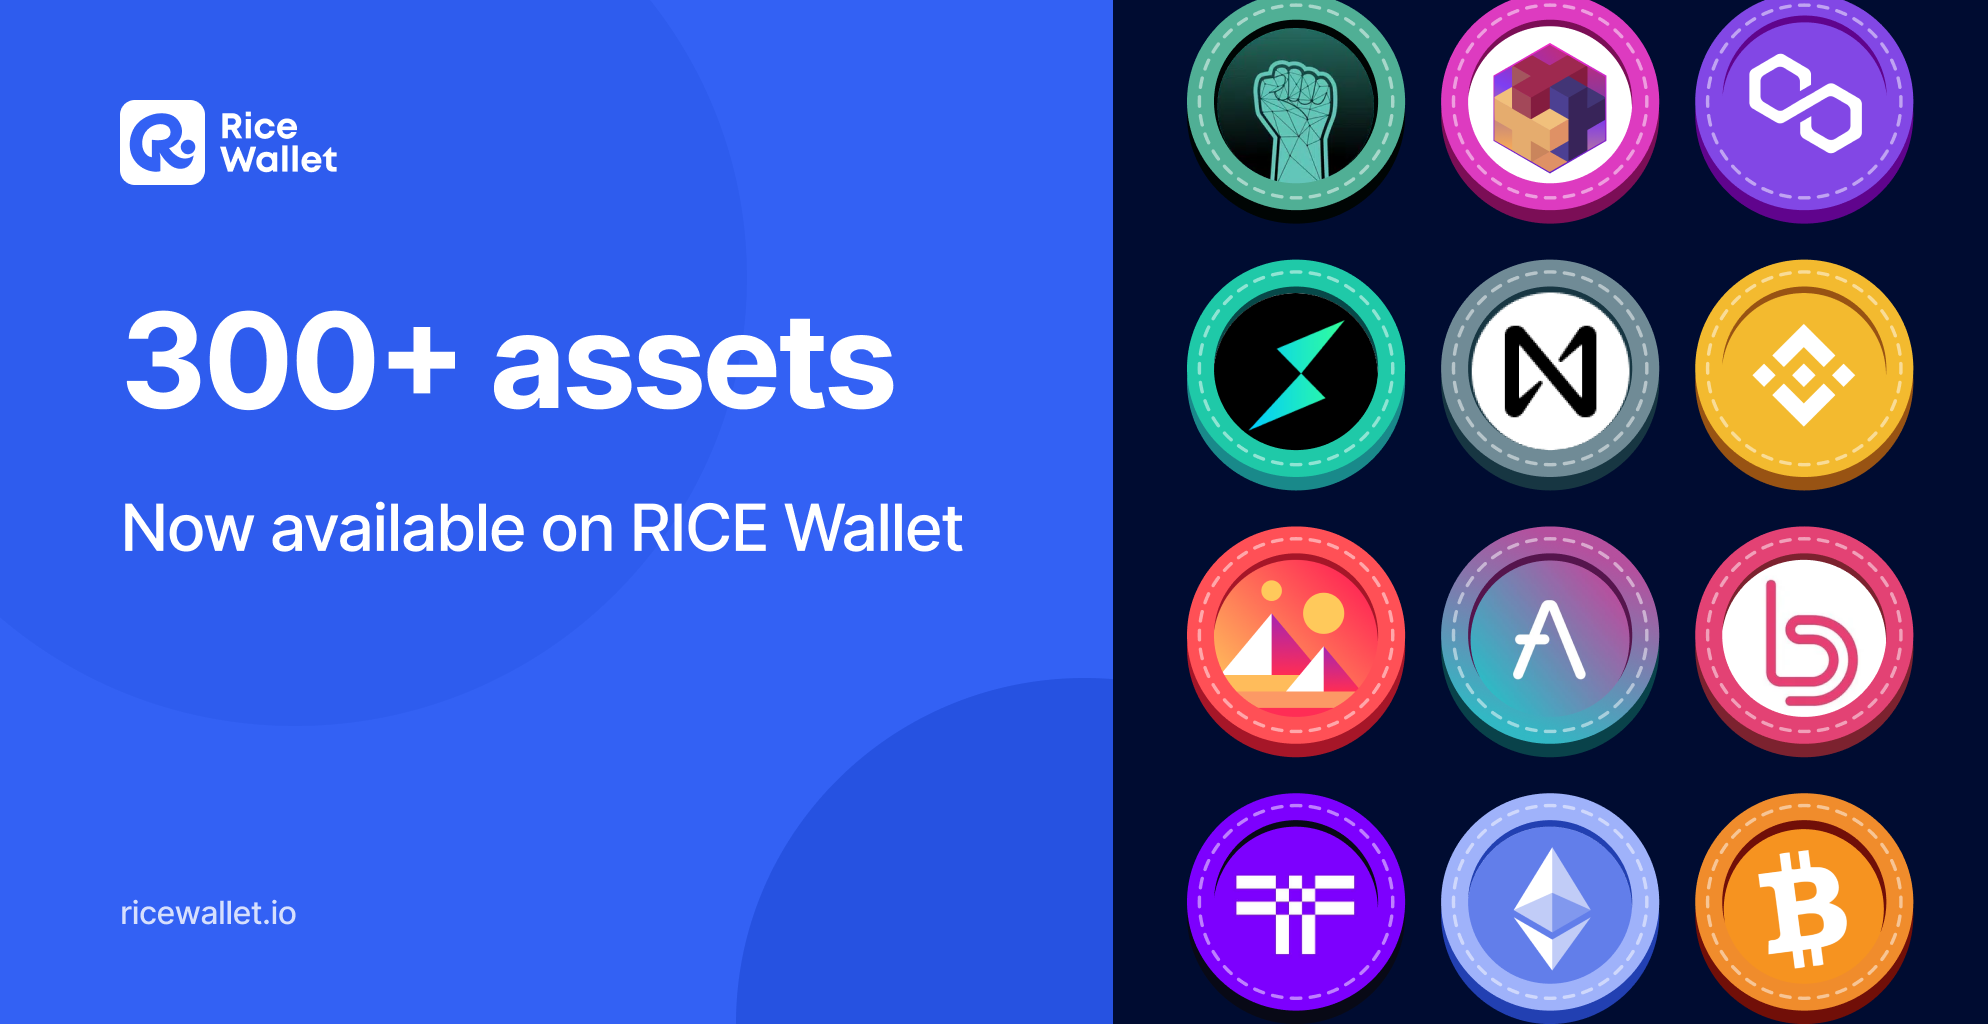 More than 300 assets are available on RICE Wallet